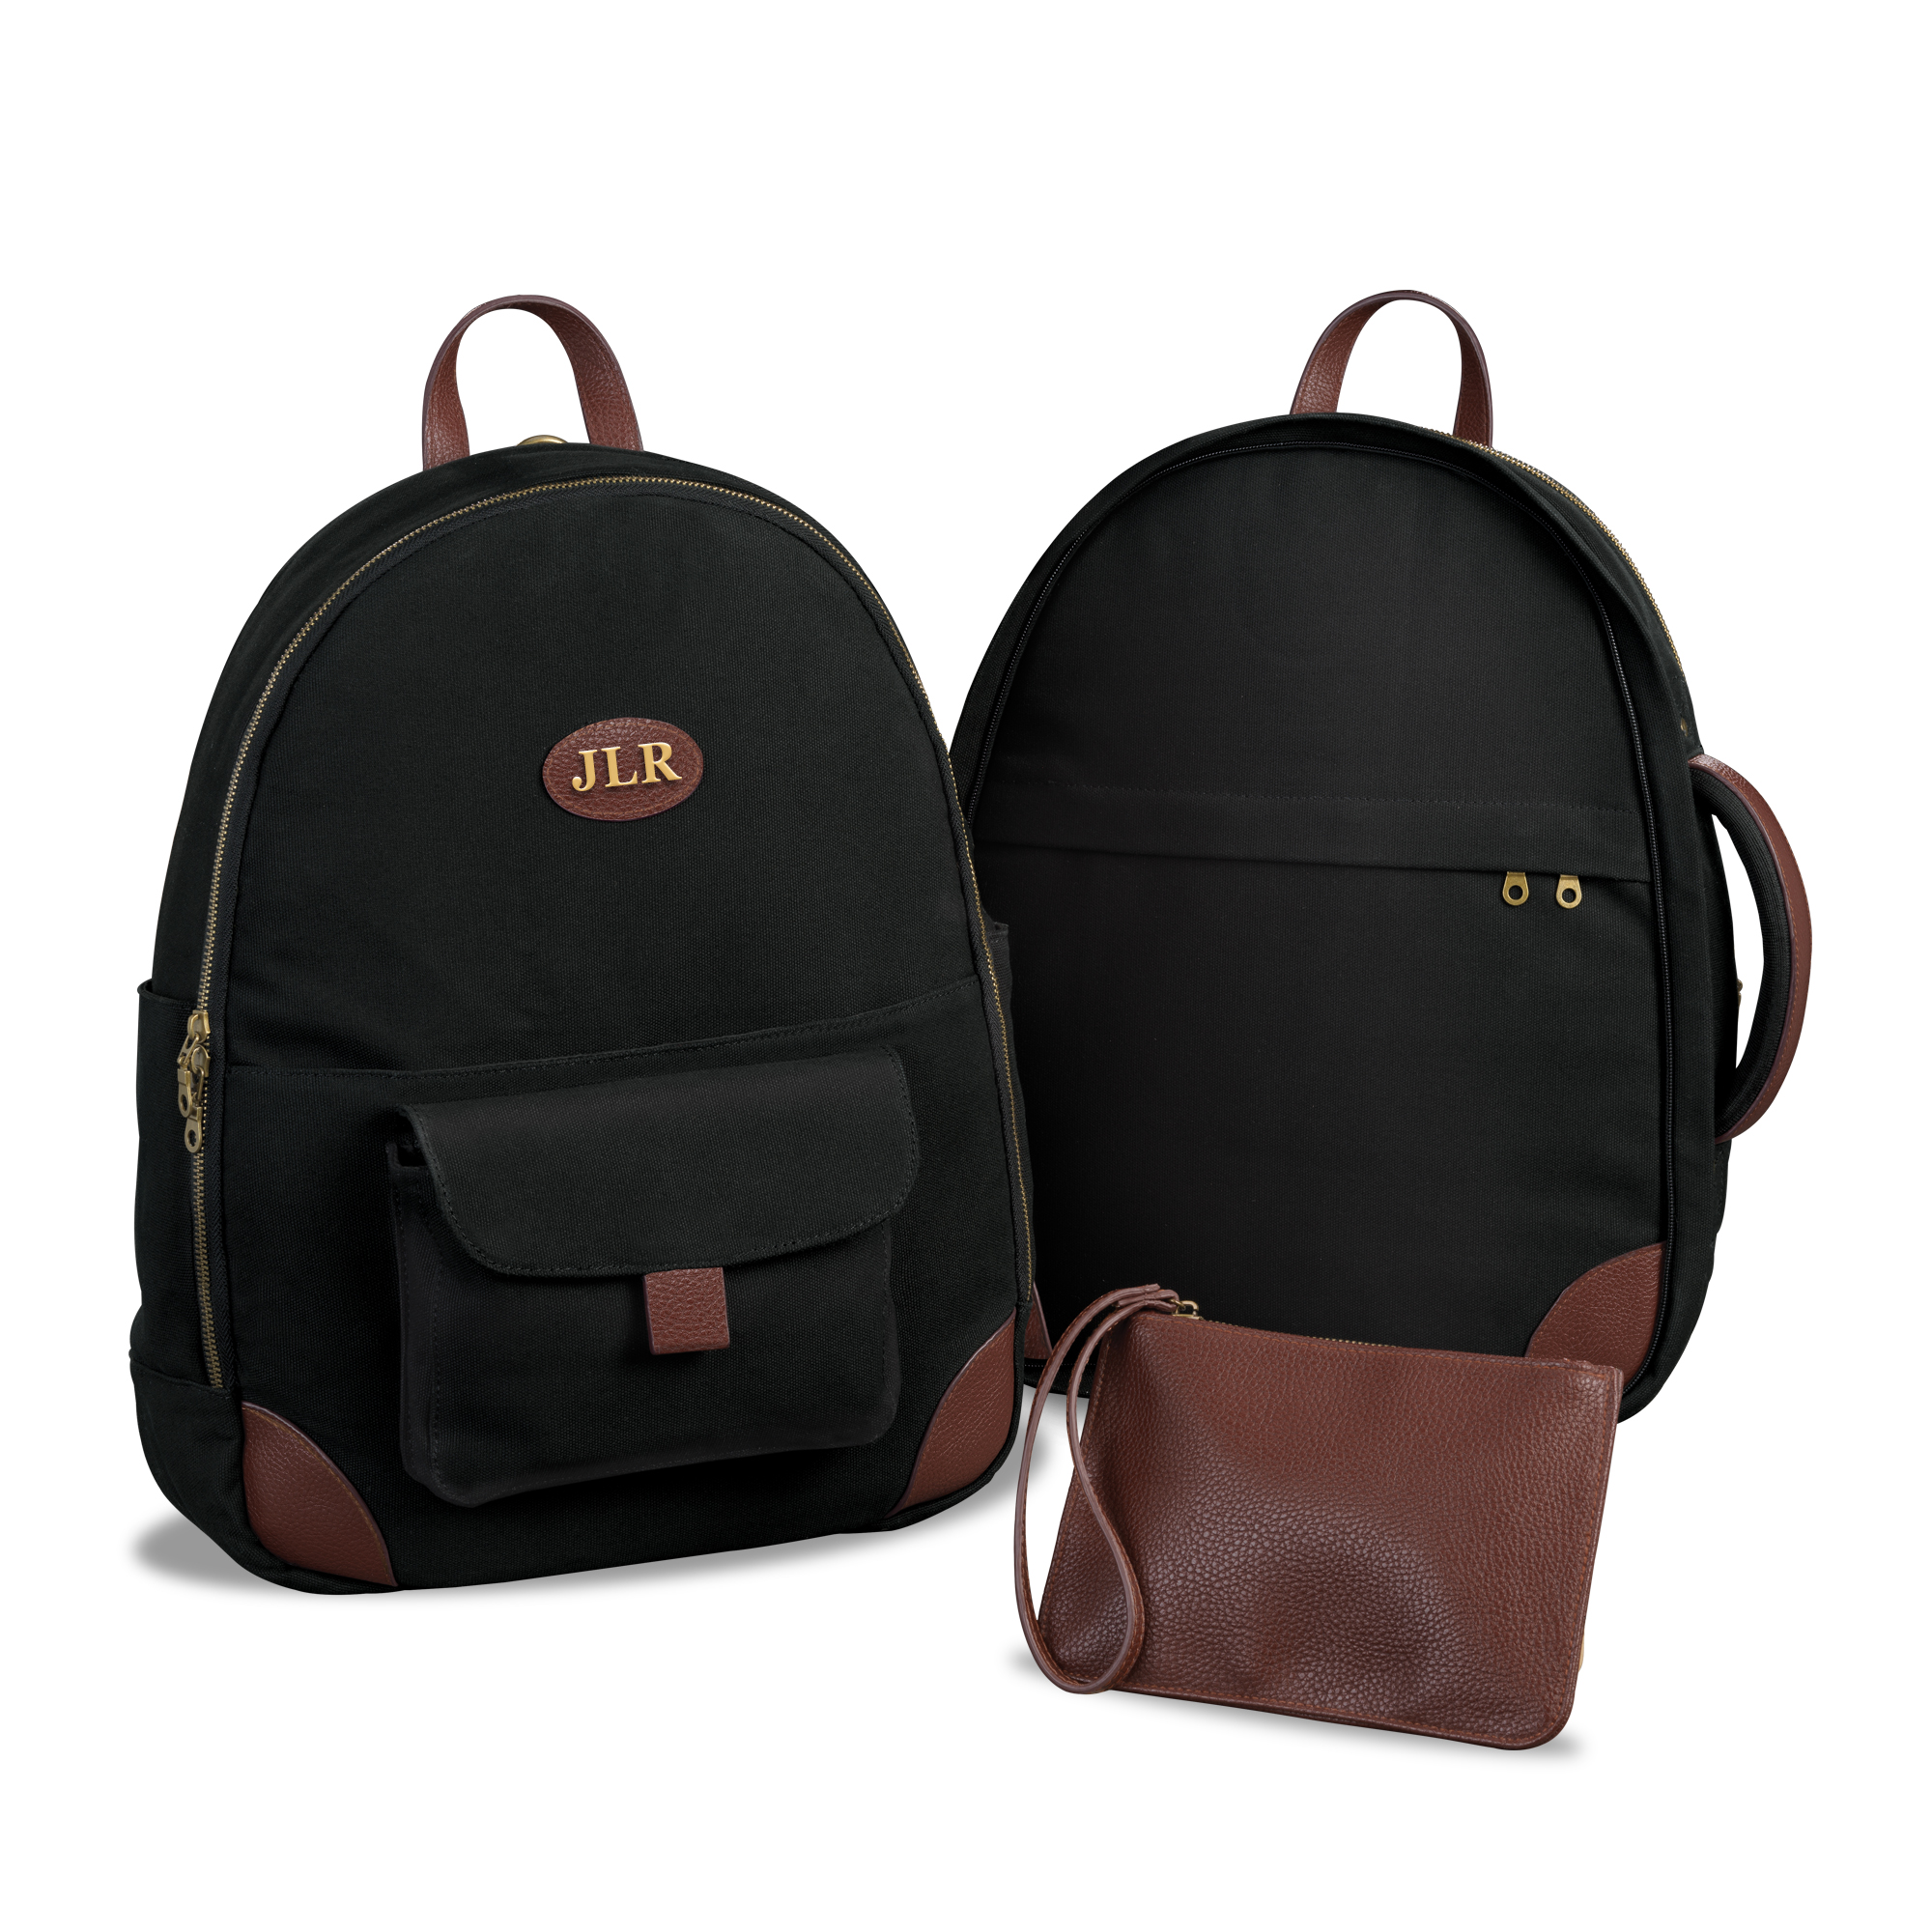 Trusty backpacks that won't disappoint. Shop the Thaddeus Backpack